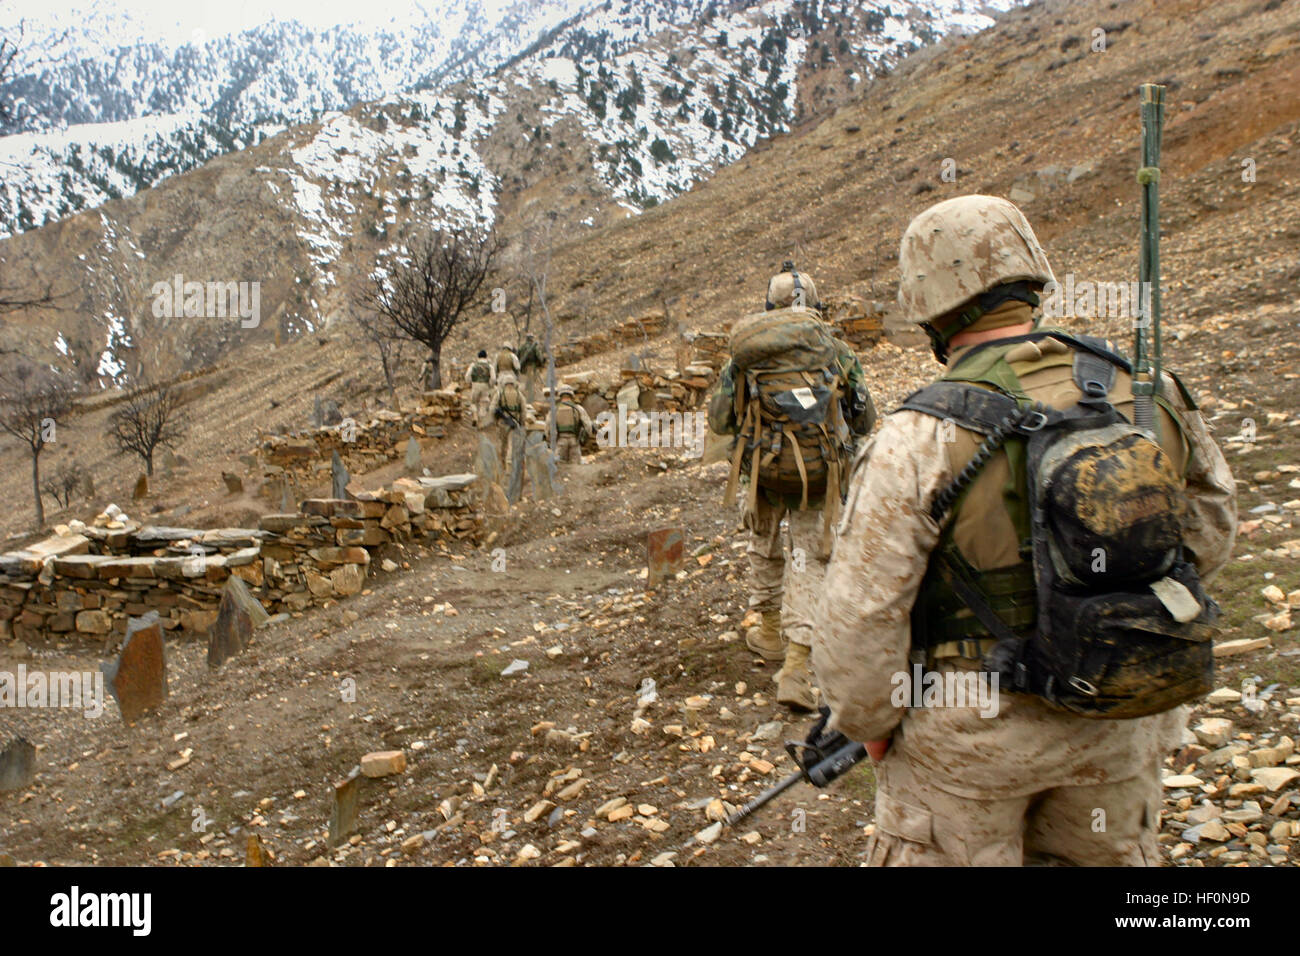 Marines of Kilo Company, 3rd Battalion, 3rd Marine Regiment, patrol on the outskrits of a village during Operation Mavericks, an operation that Marines conducted to capture suspected Anti Coaltion Forces in the vicinity of Methar Lam, Afghanistan on March 20, 2005. 3rd Battalion, 3rd Marines is conducting security and stabilization operations in support of Operation Enduring Freedom. (U.S. Marine Corps photo by Corporal James L. Yarboro) Released 3rd Battalion 3rd Marines - Methar Lam Stock Photo